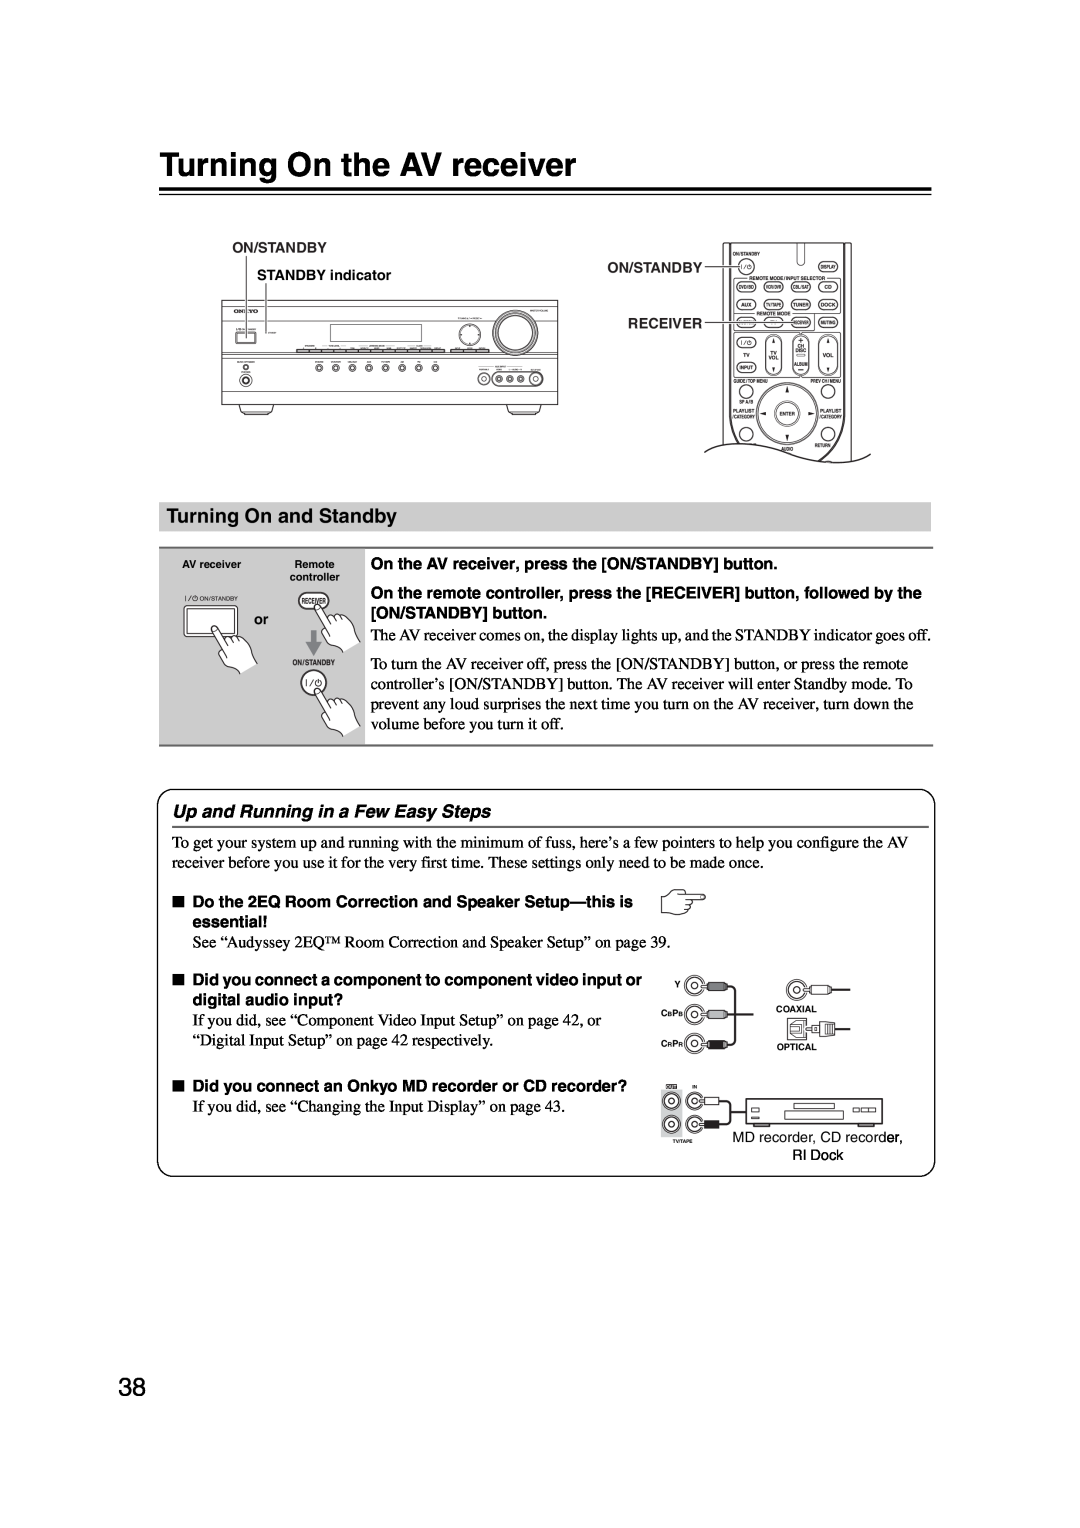 Onkyo 29344934 instruction manual Turning On the AV receiver, Turning On and Standby, Up and Running in a Few Easy Steps 